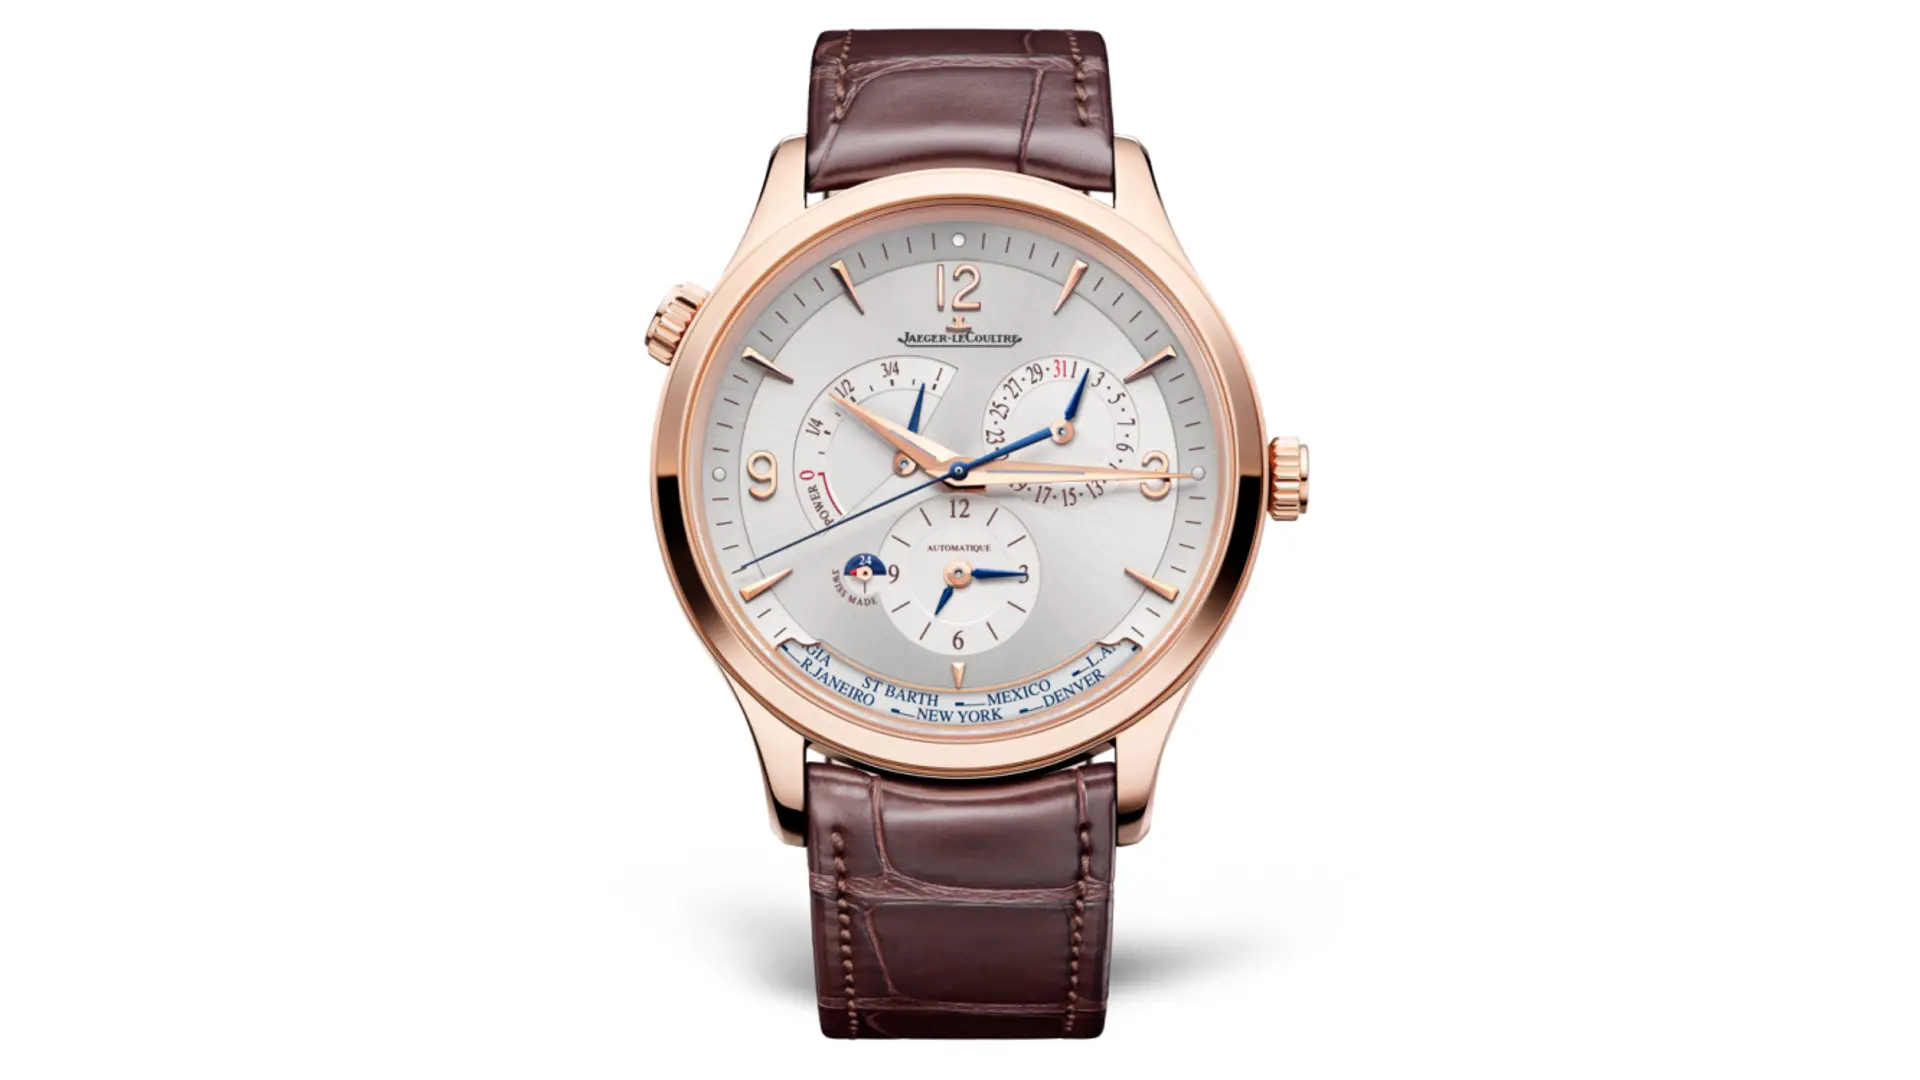 Lifestyle Articles - Ten of the Best Travel Watches - 3